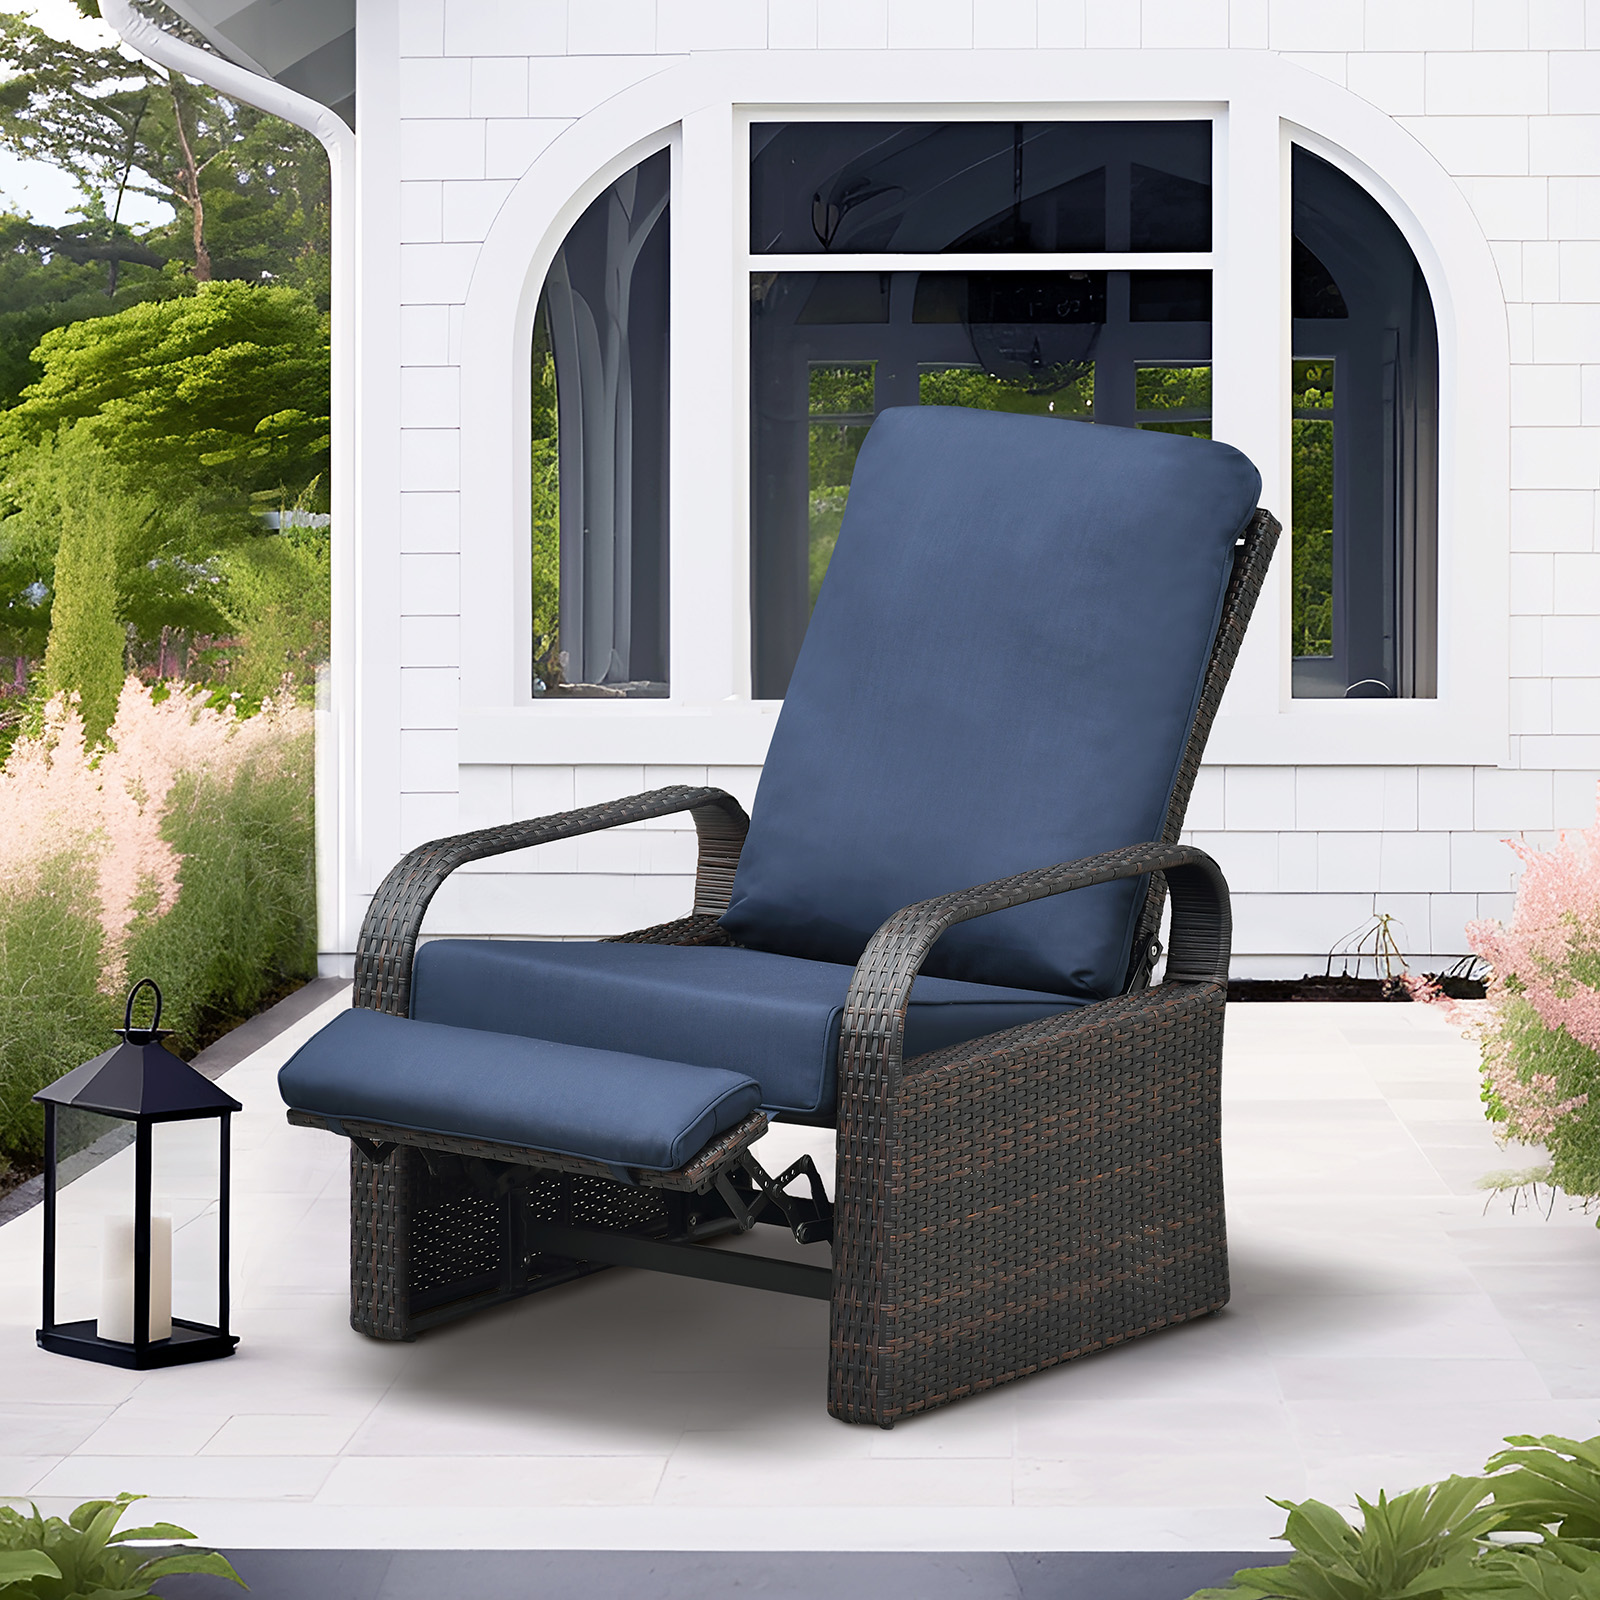 ATR ART to REAL Outdoor Patio Rattan Wicker Adjustable Recliner Chair with Cushion,Dark Blue - image 1 of 11